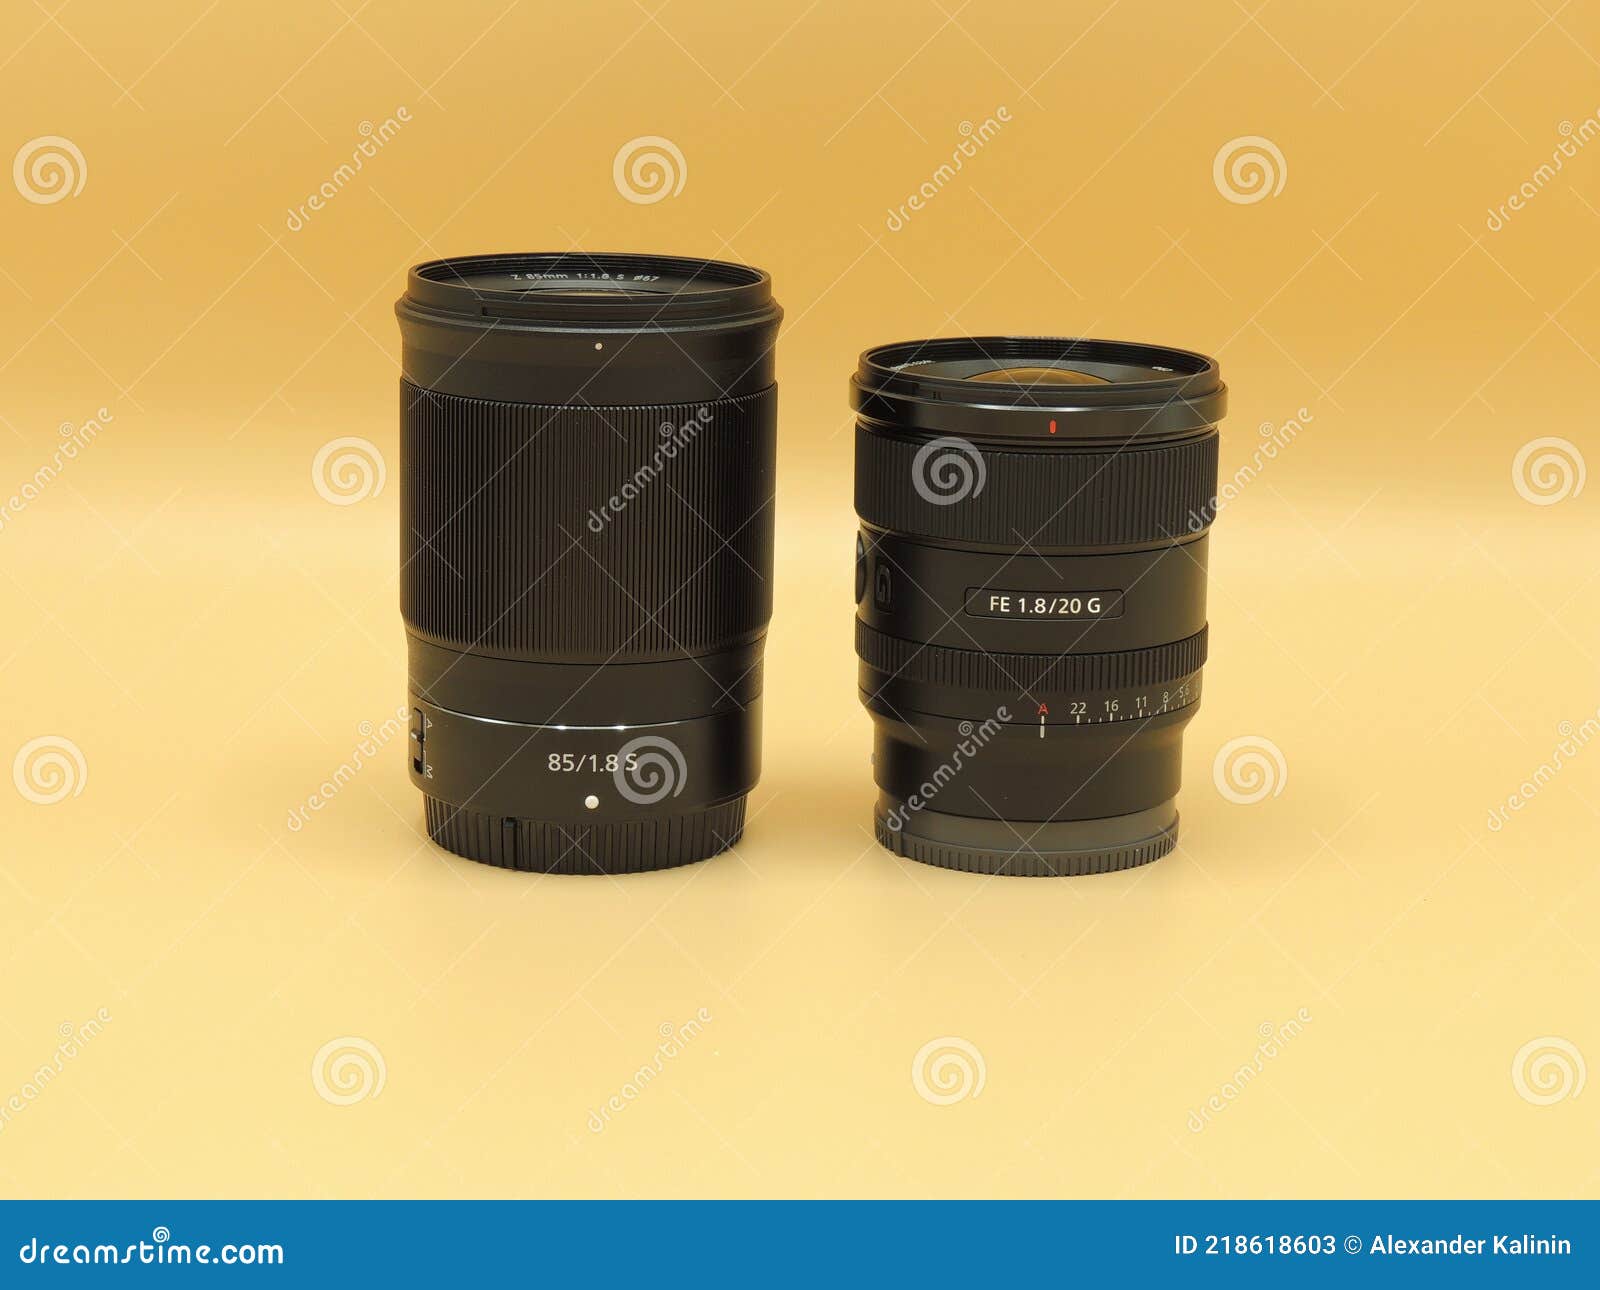 the best portrait lens is nikon nikkor z 85mm f1. 8 s black and the best wide angle lens is sony fe 20mm f1.8 g black on a yellow